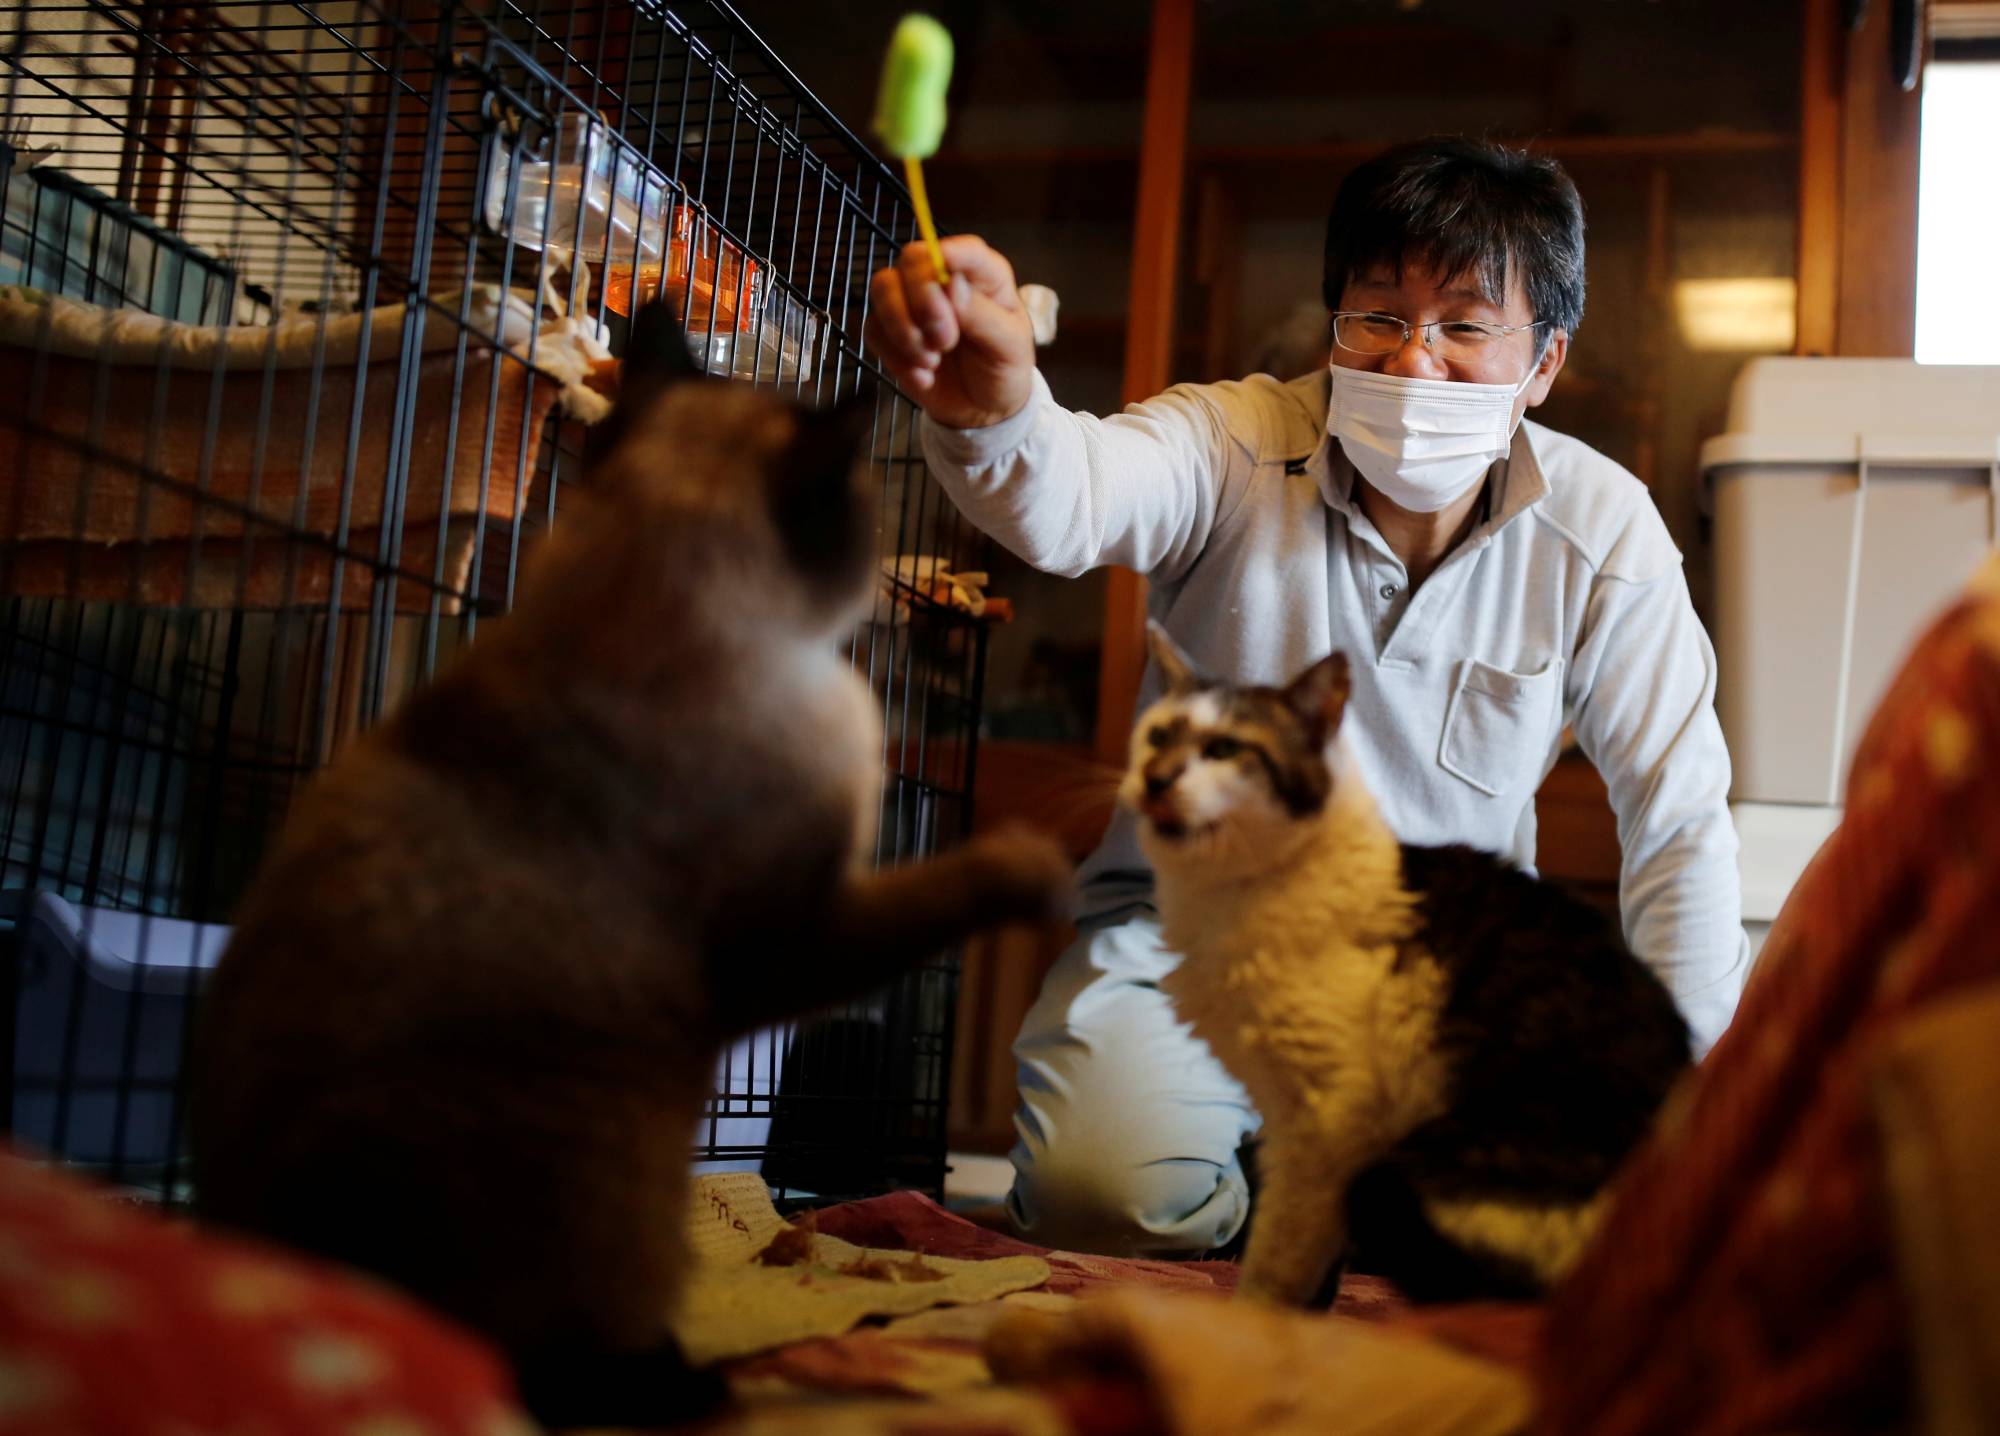 Sakae Kato looks after 41 cats in his home in a restricted zone in Namie, Fukushima Prefecture. | REUTERS